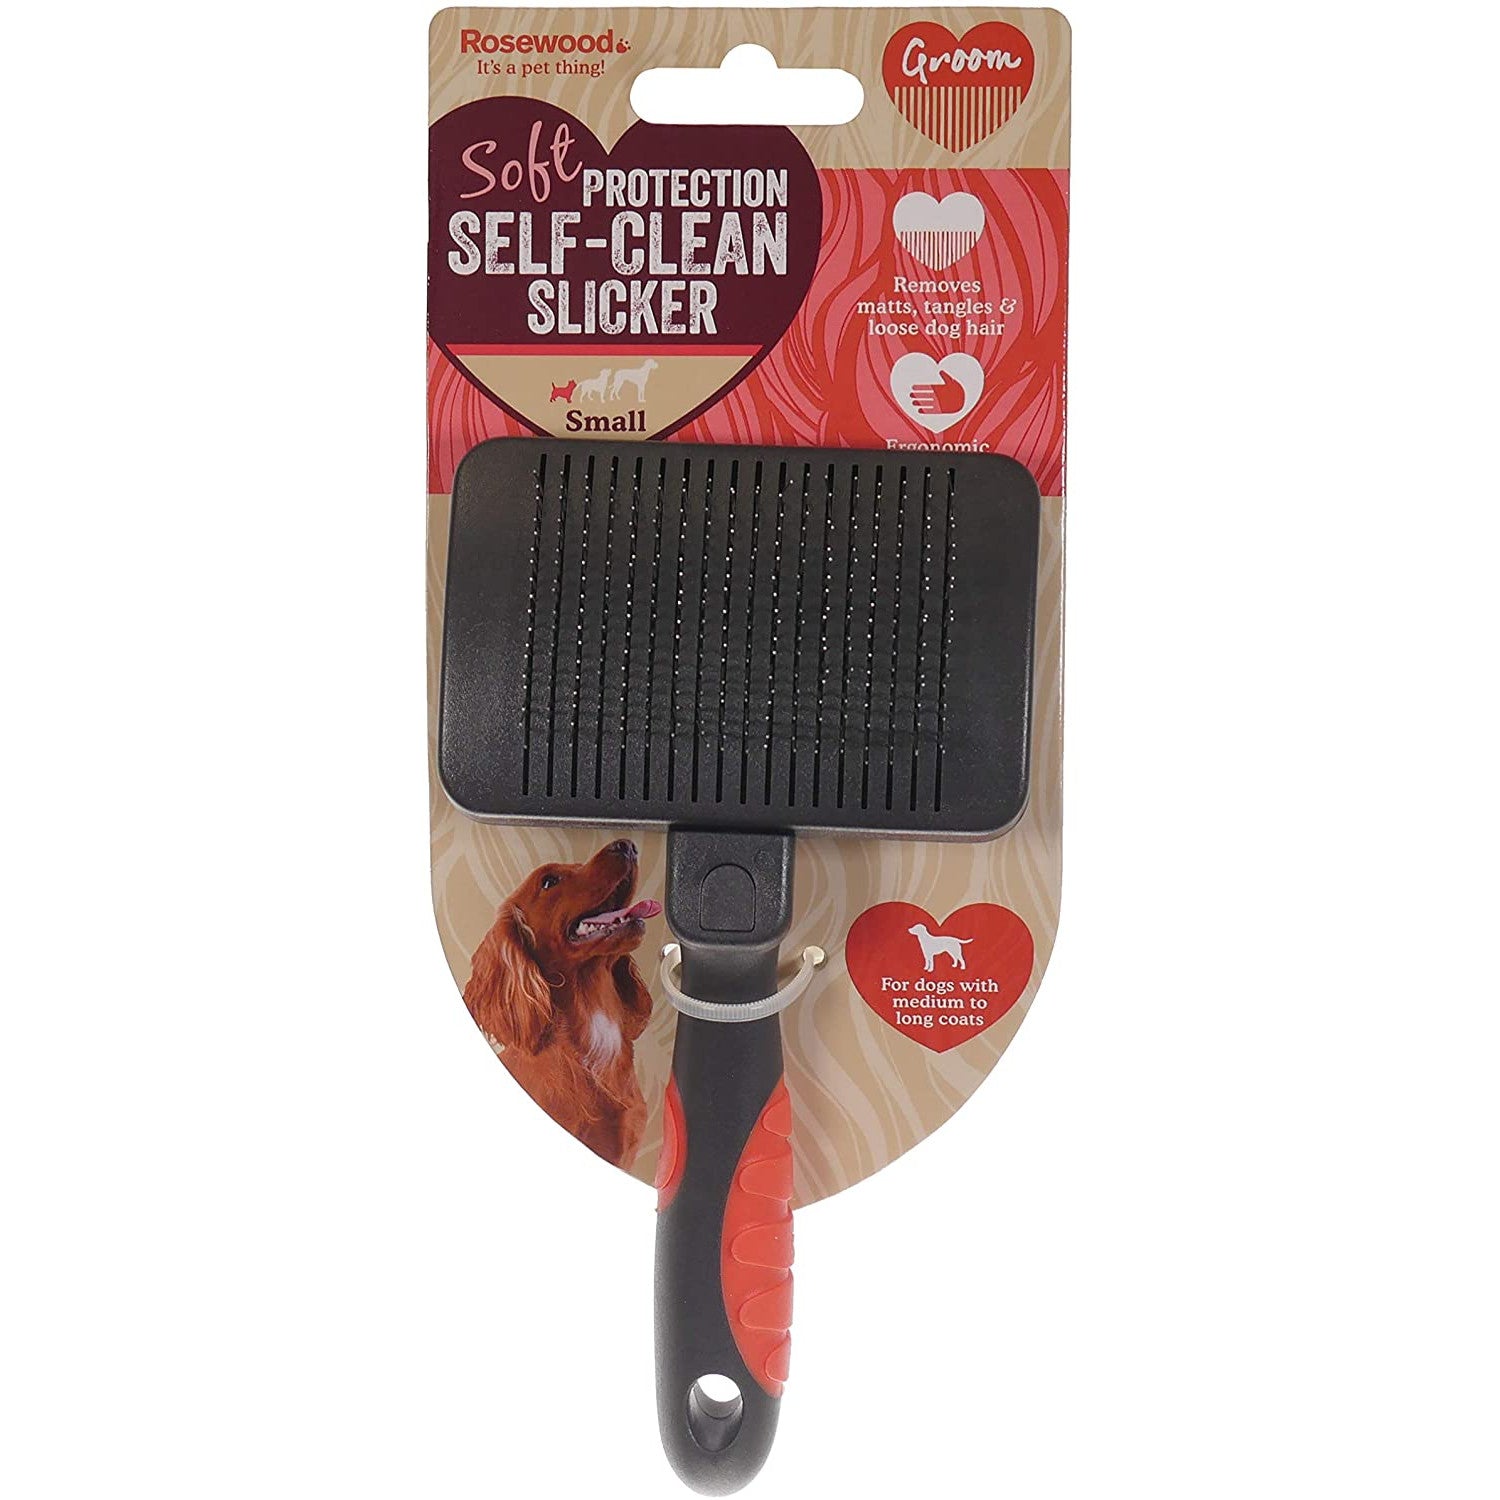 Rosewood Self Cleaning Slicker Brush - Small